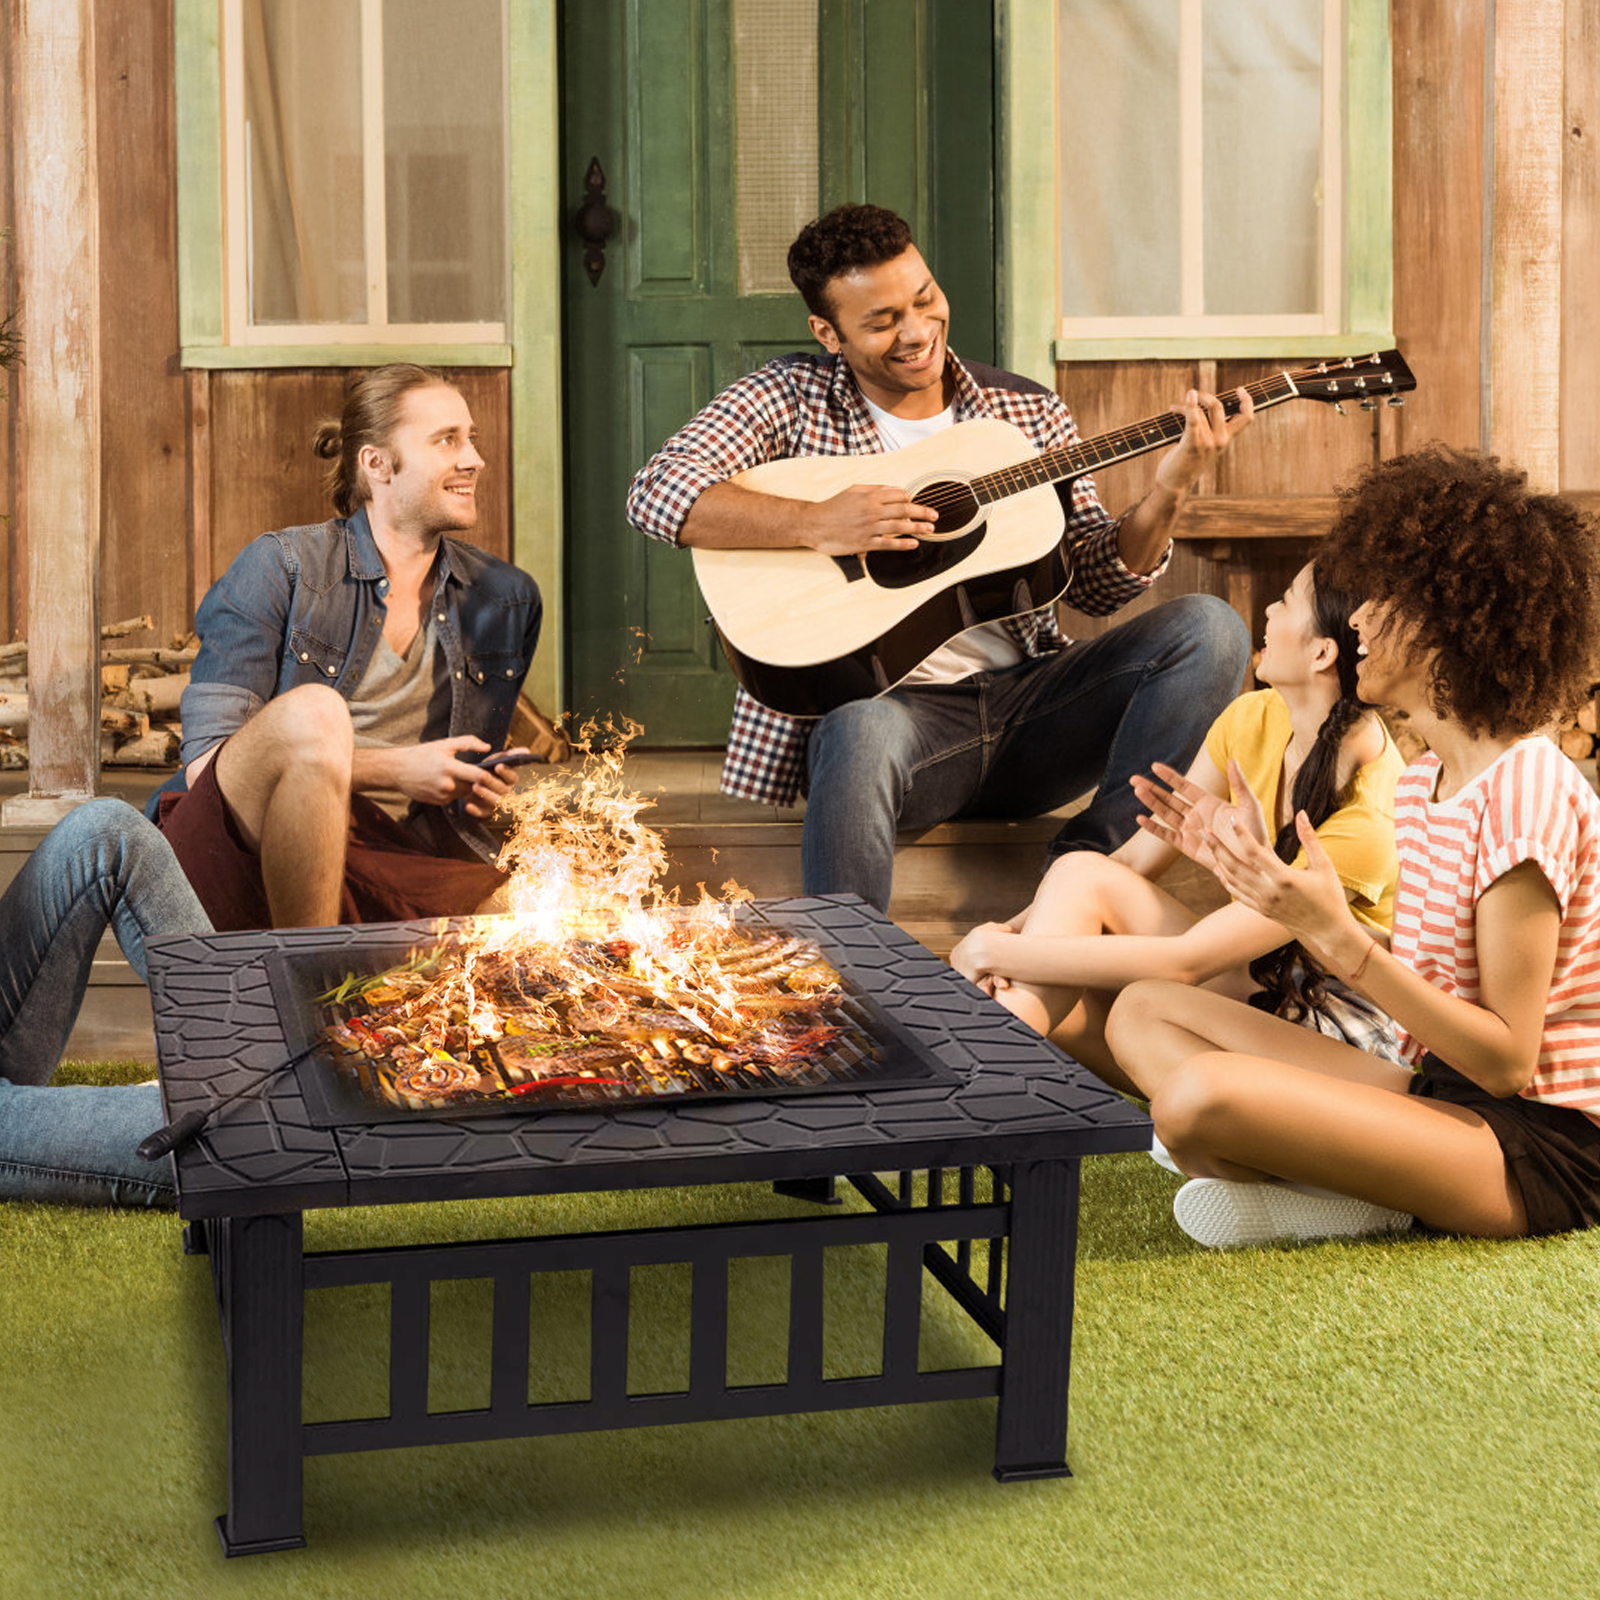 Kingso-32-Inch-Fire-Pit-Square-Steel-Wood-Burning-Large-Firepits-with-Waterproof-Cover-Spark-ScreenL-1787362-12